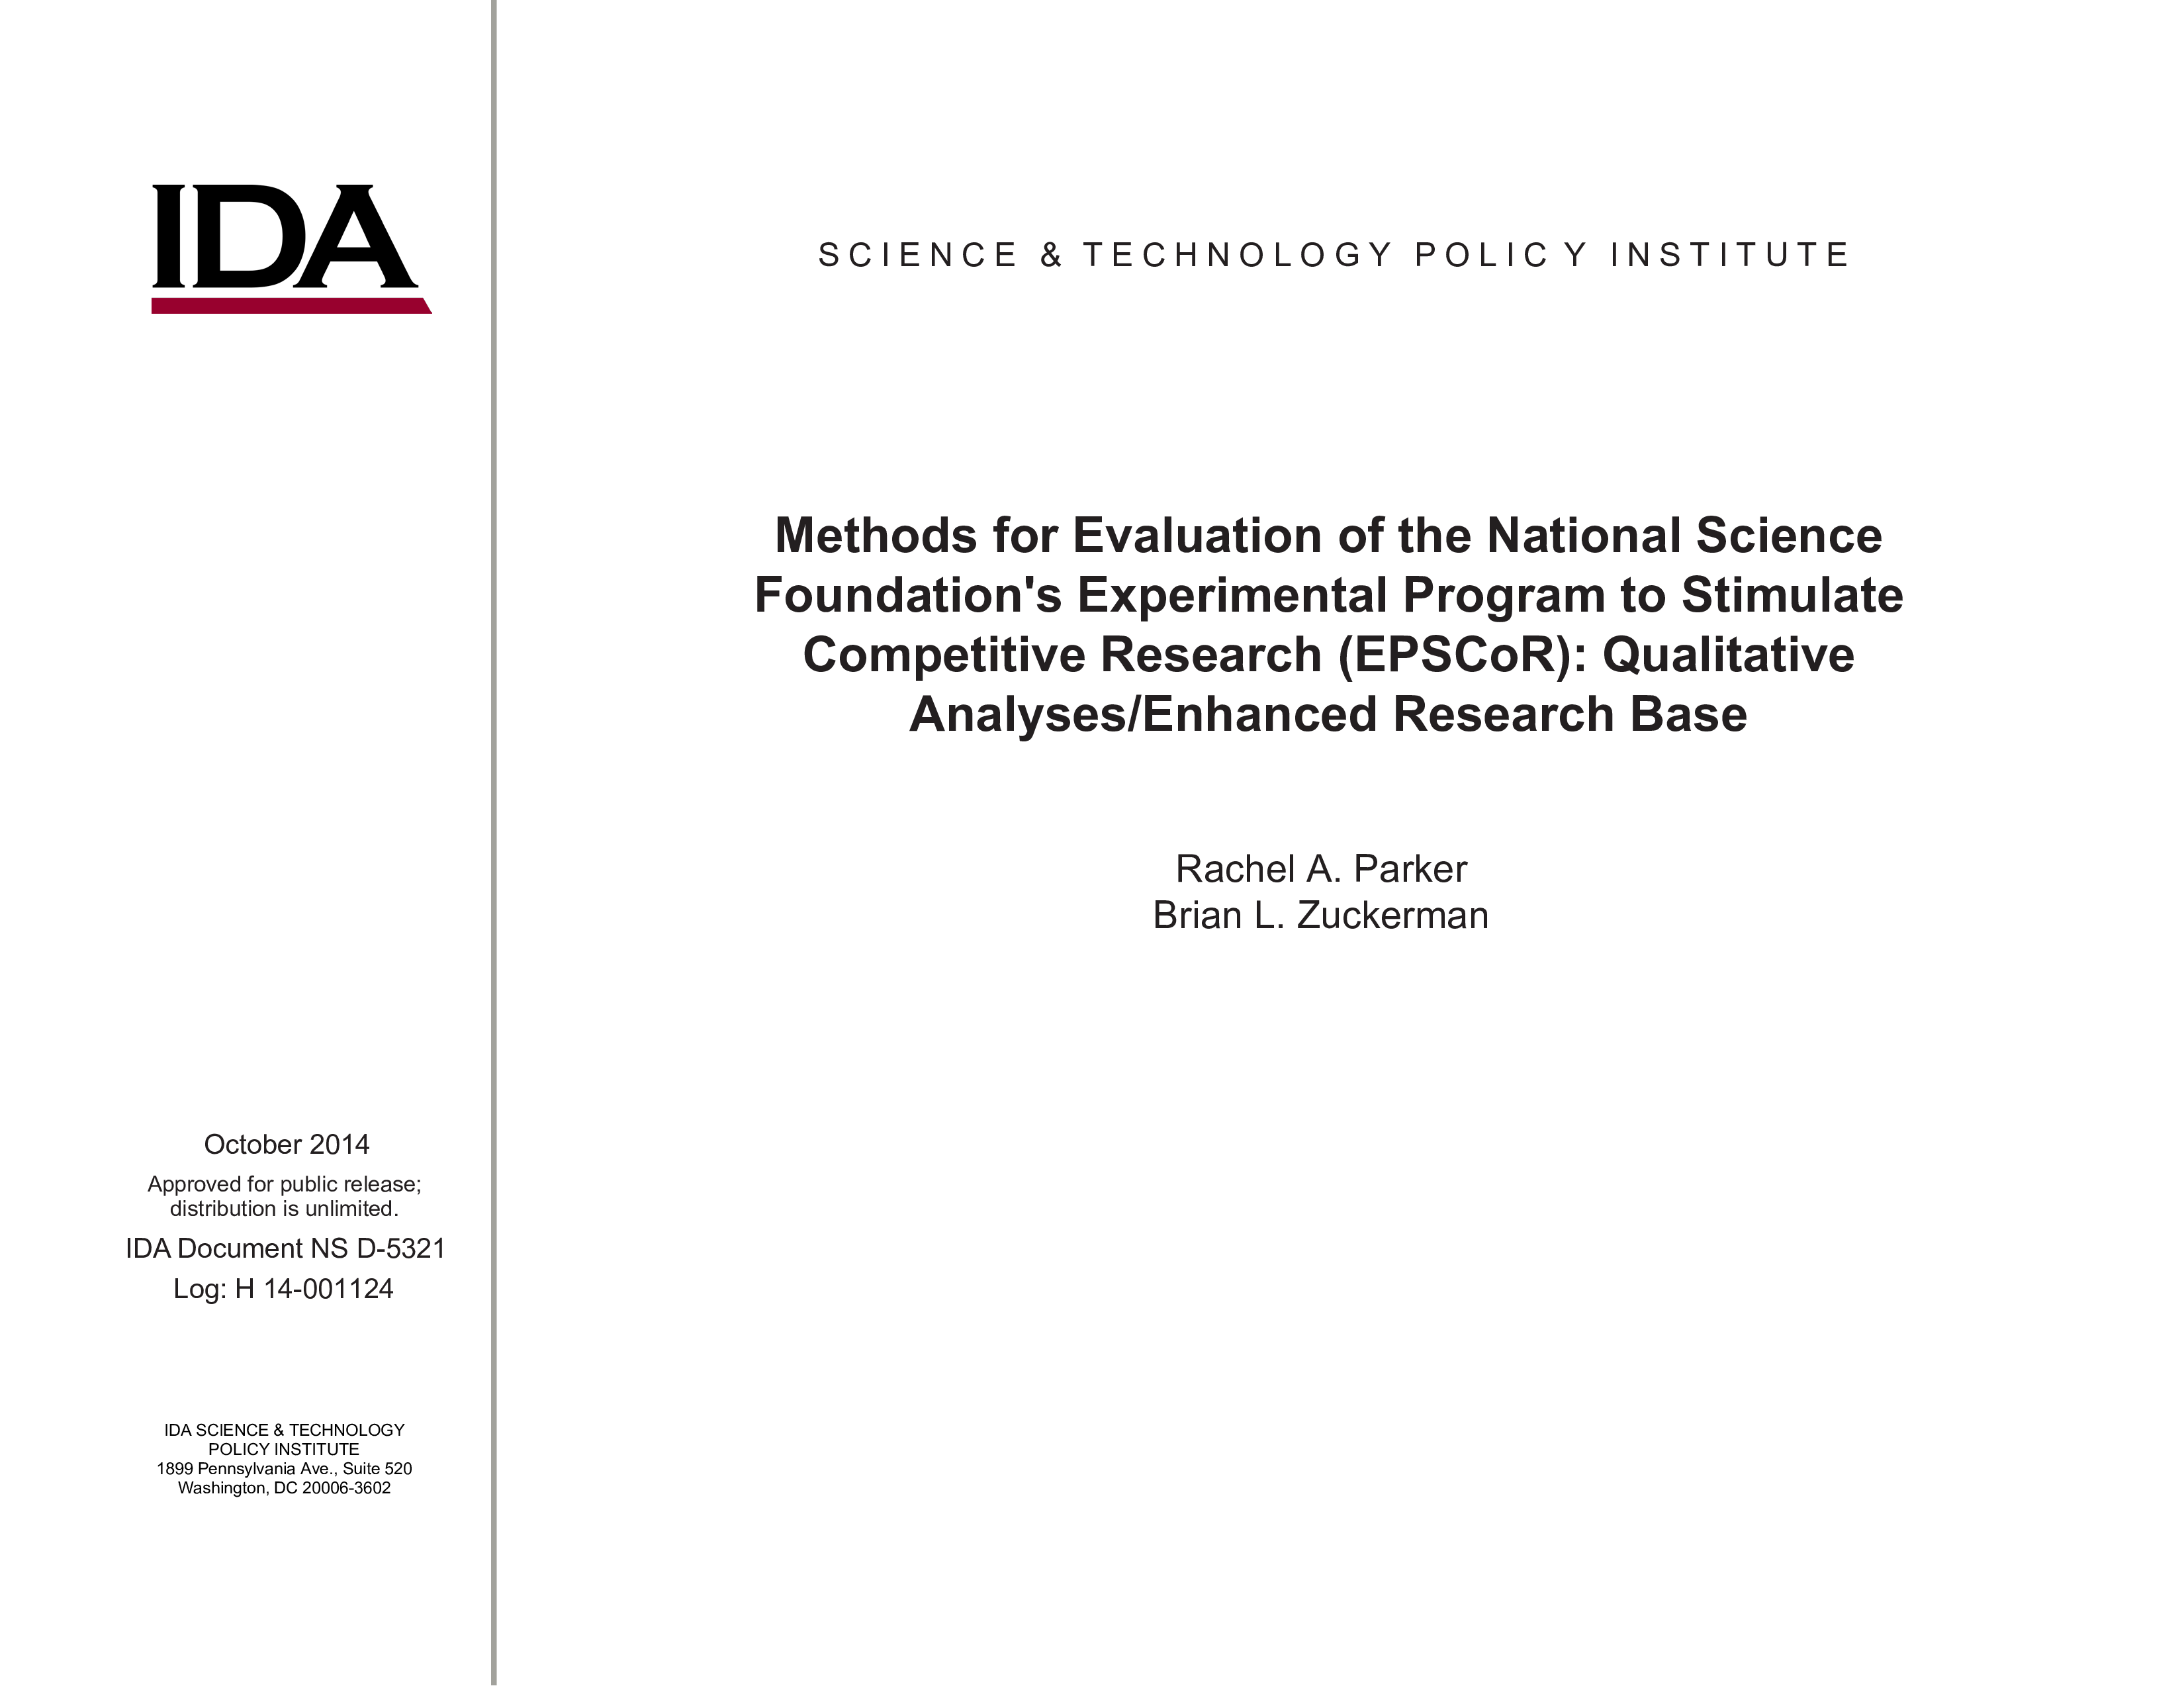 Methods for Evaluation of the National Science Foundation’s Experimental Program to Stimulate Competitive Research (EPSCoR): Qualitative Analyses/Enhanced Research Base